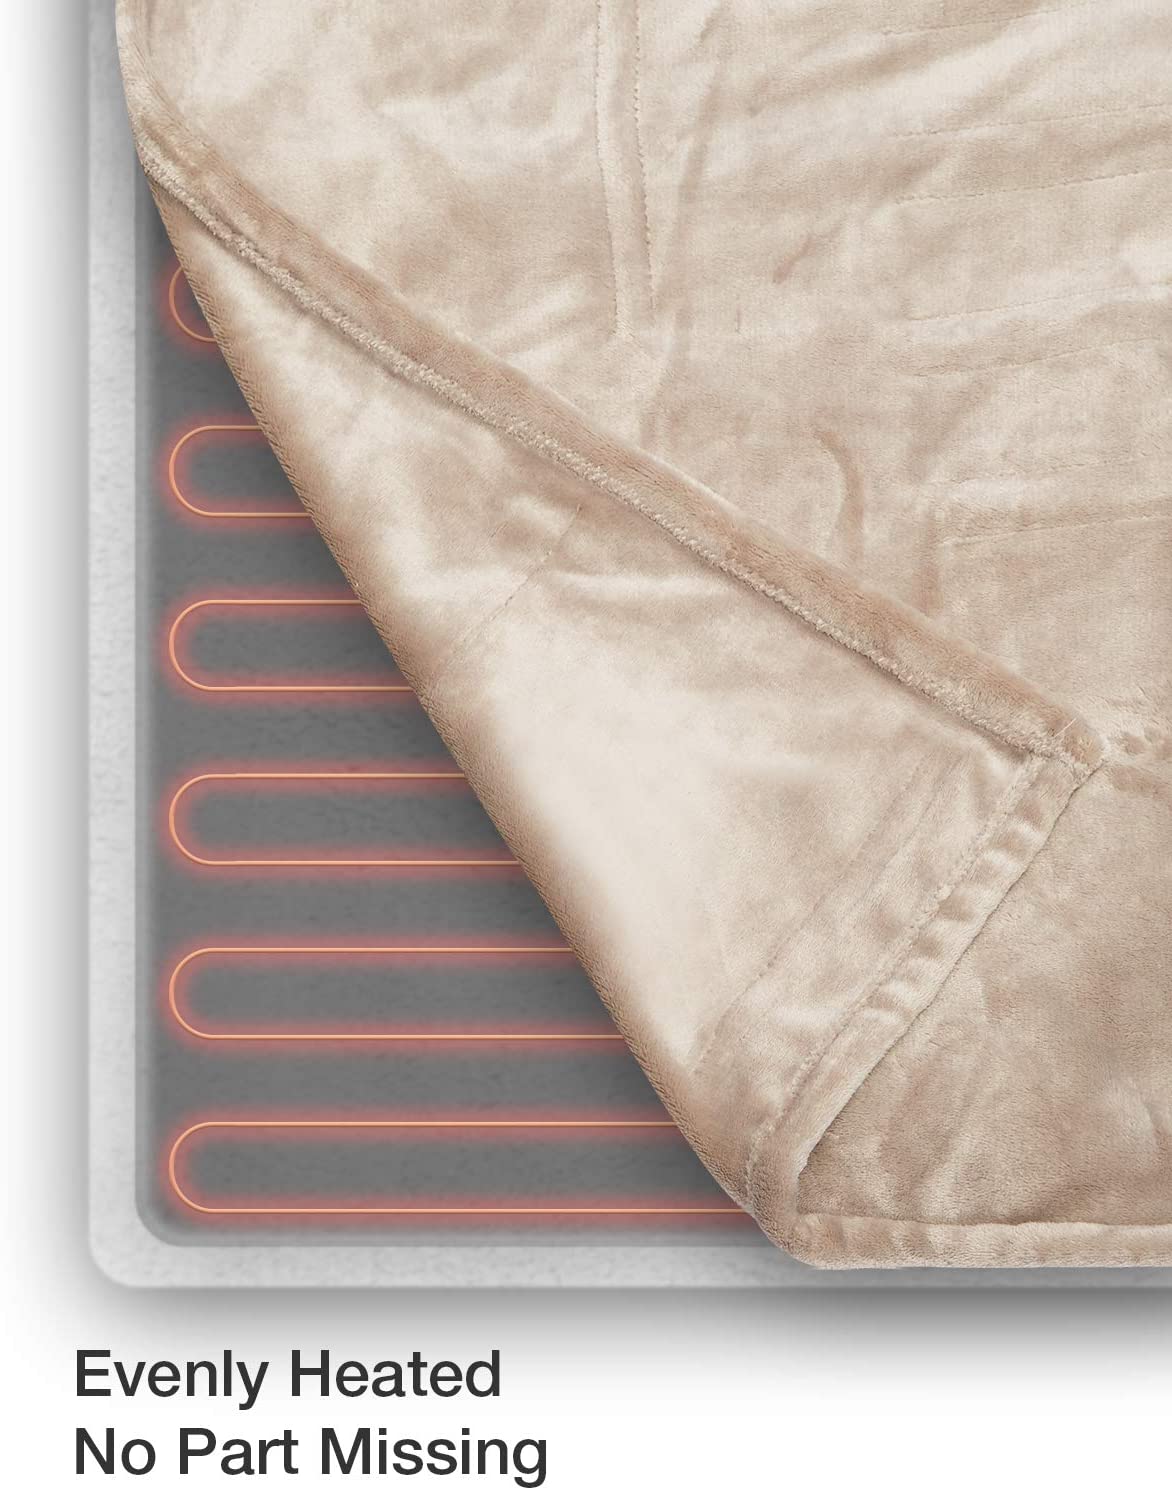 Electric Heating Blanket - Taupe 77"x 84"